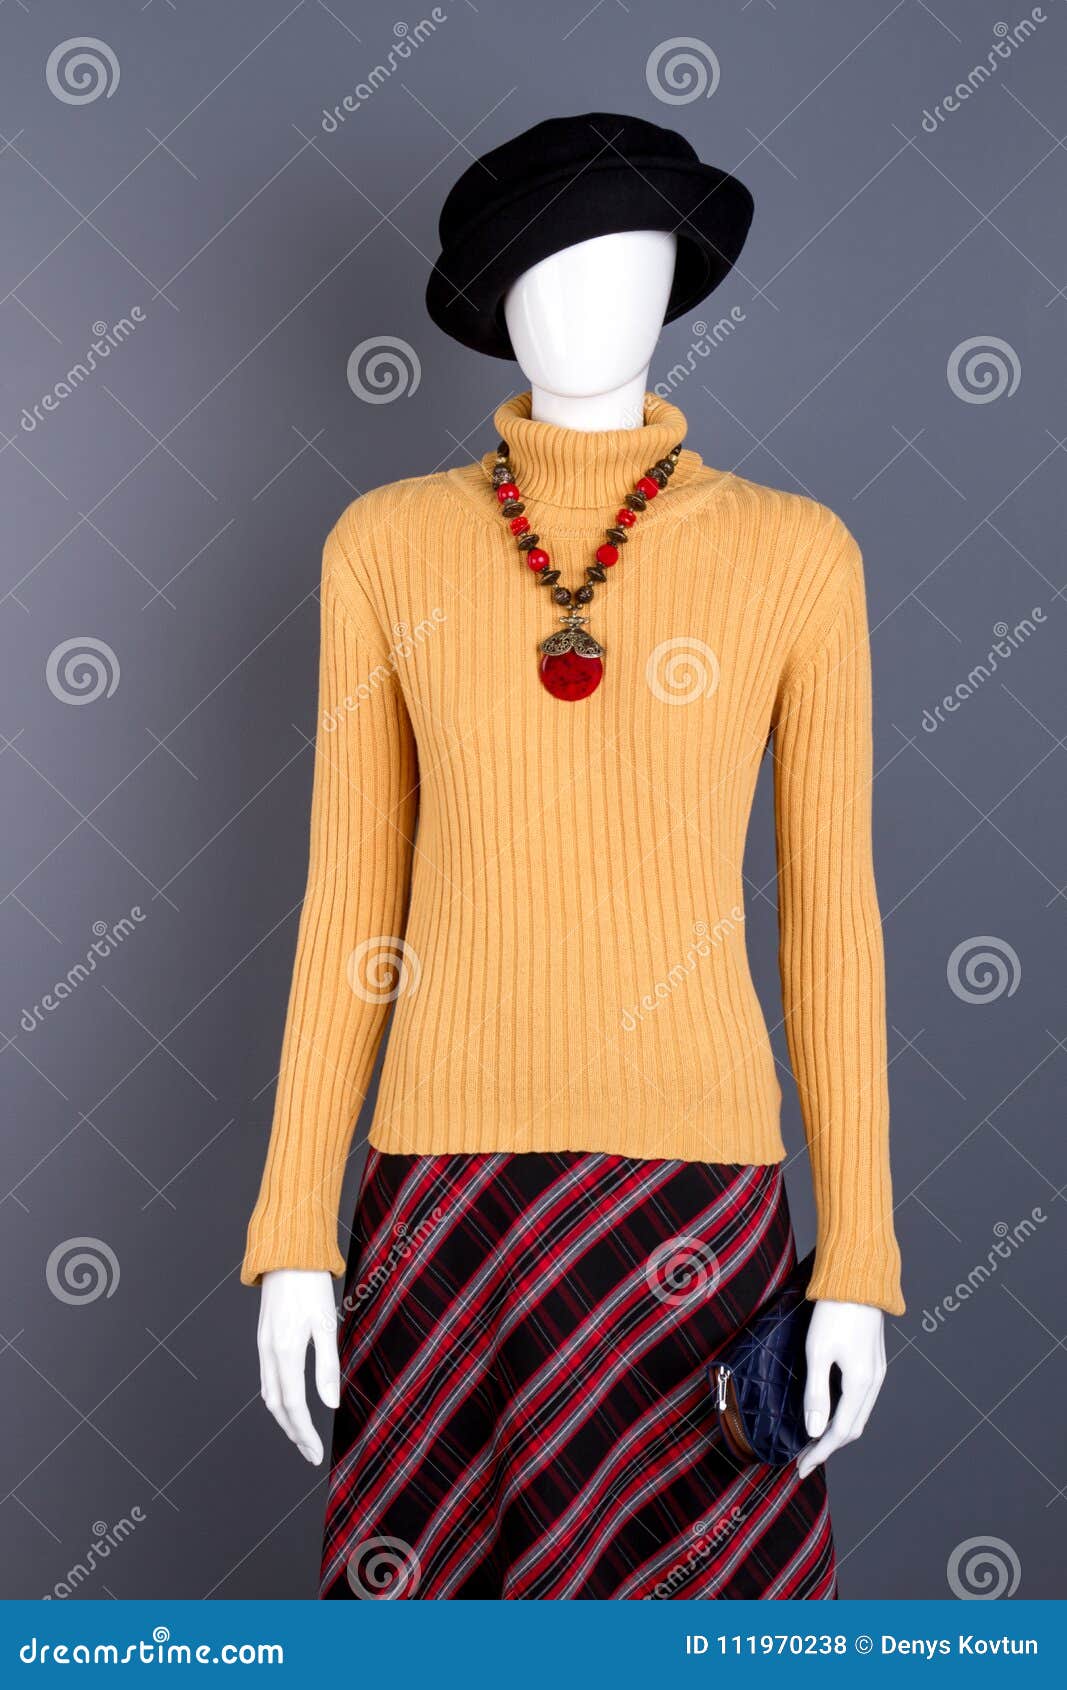 Fancy Womens Wear Mannequin. Stock Photo - Image of dress, checkered ...